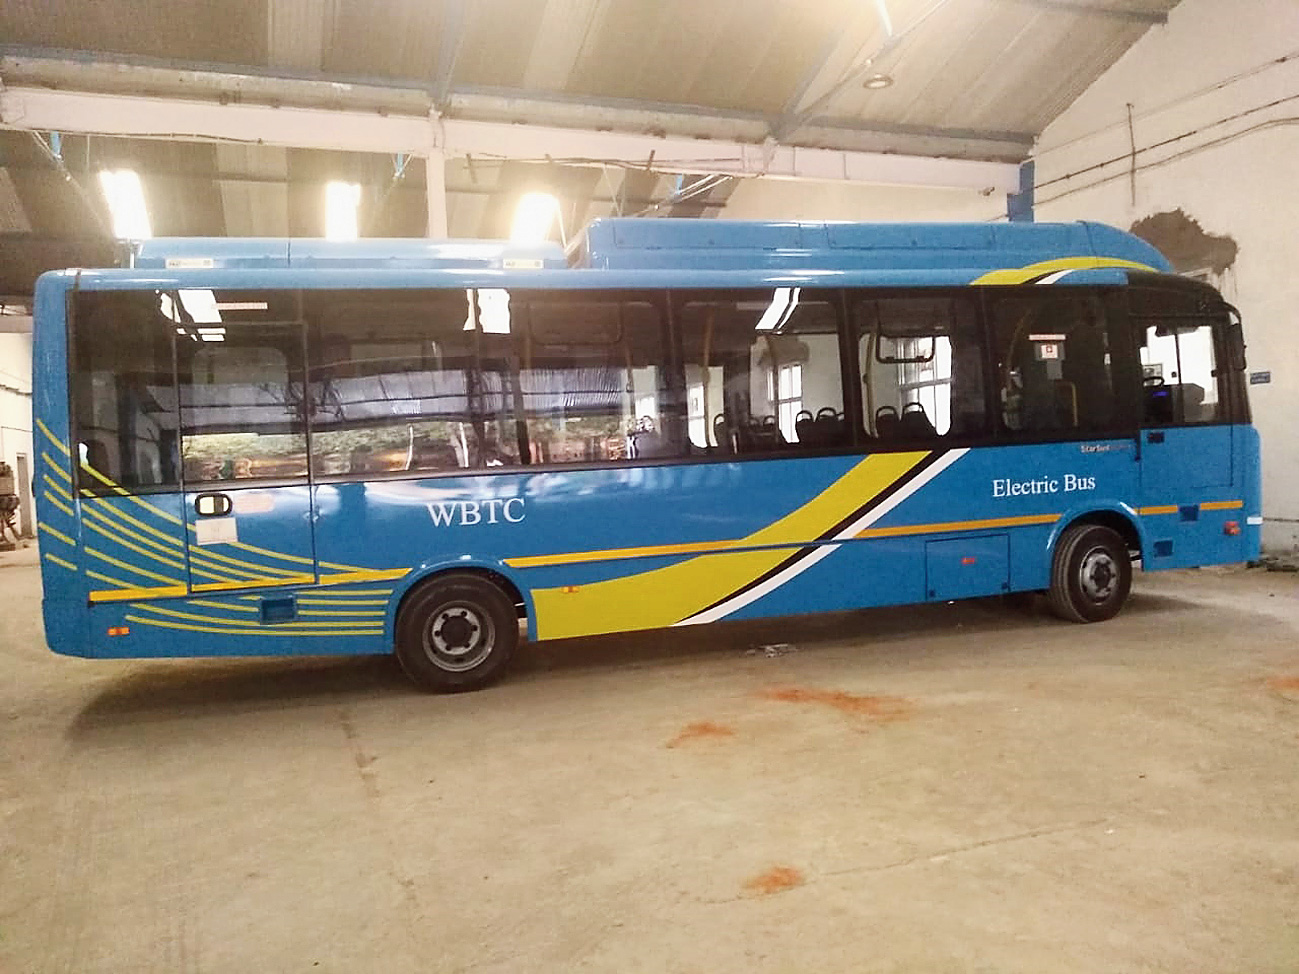 January debut for electric bus fleet in Calcutta